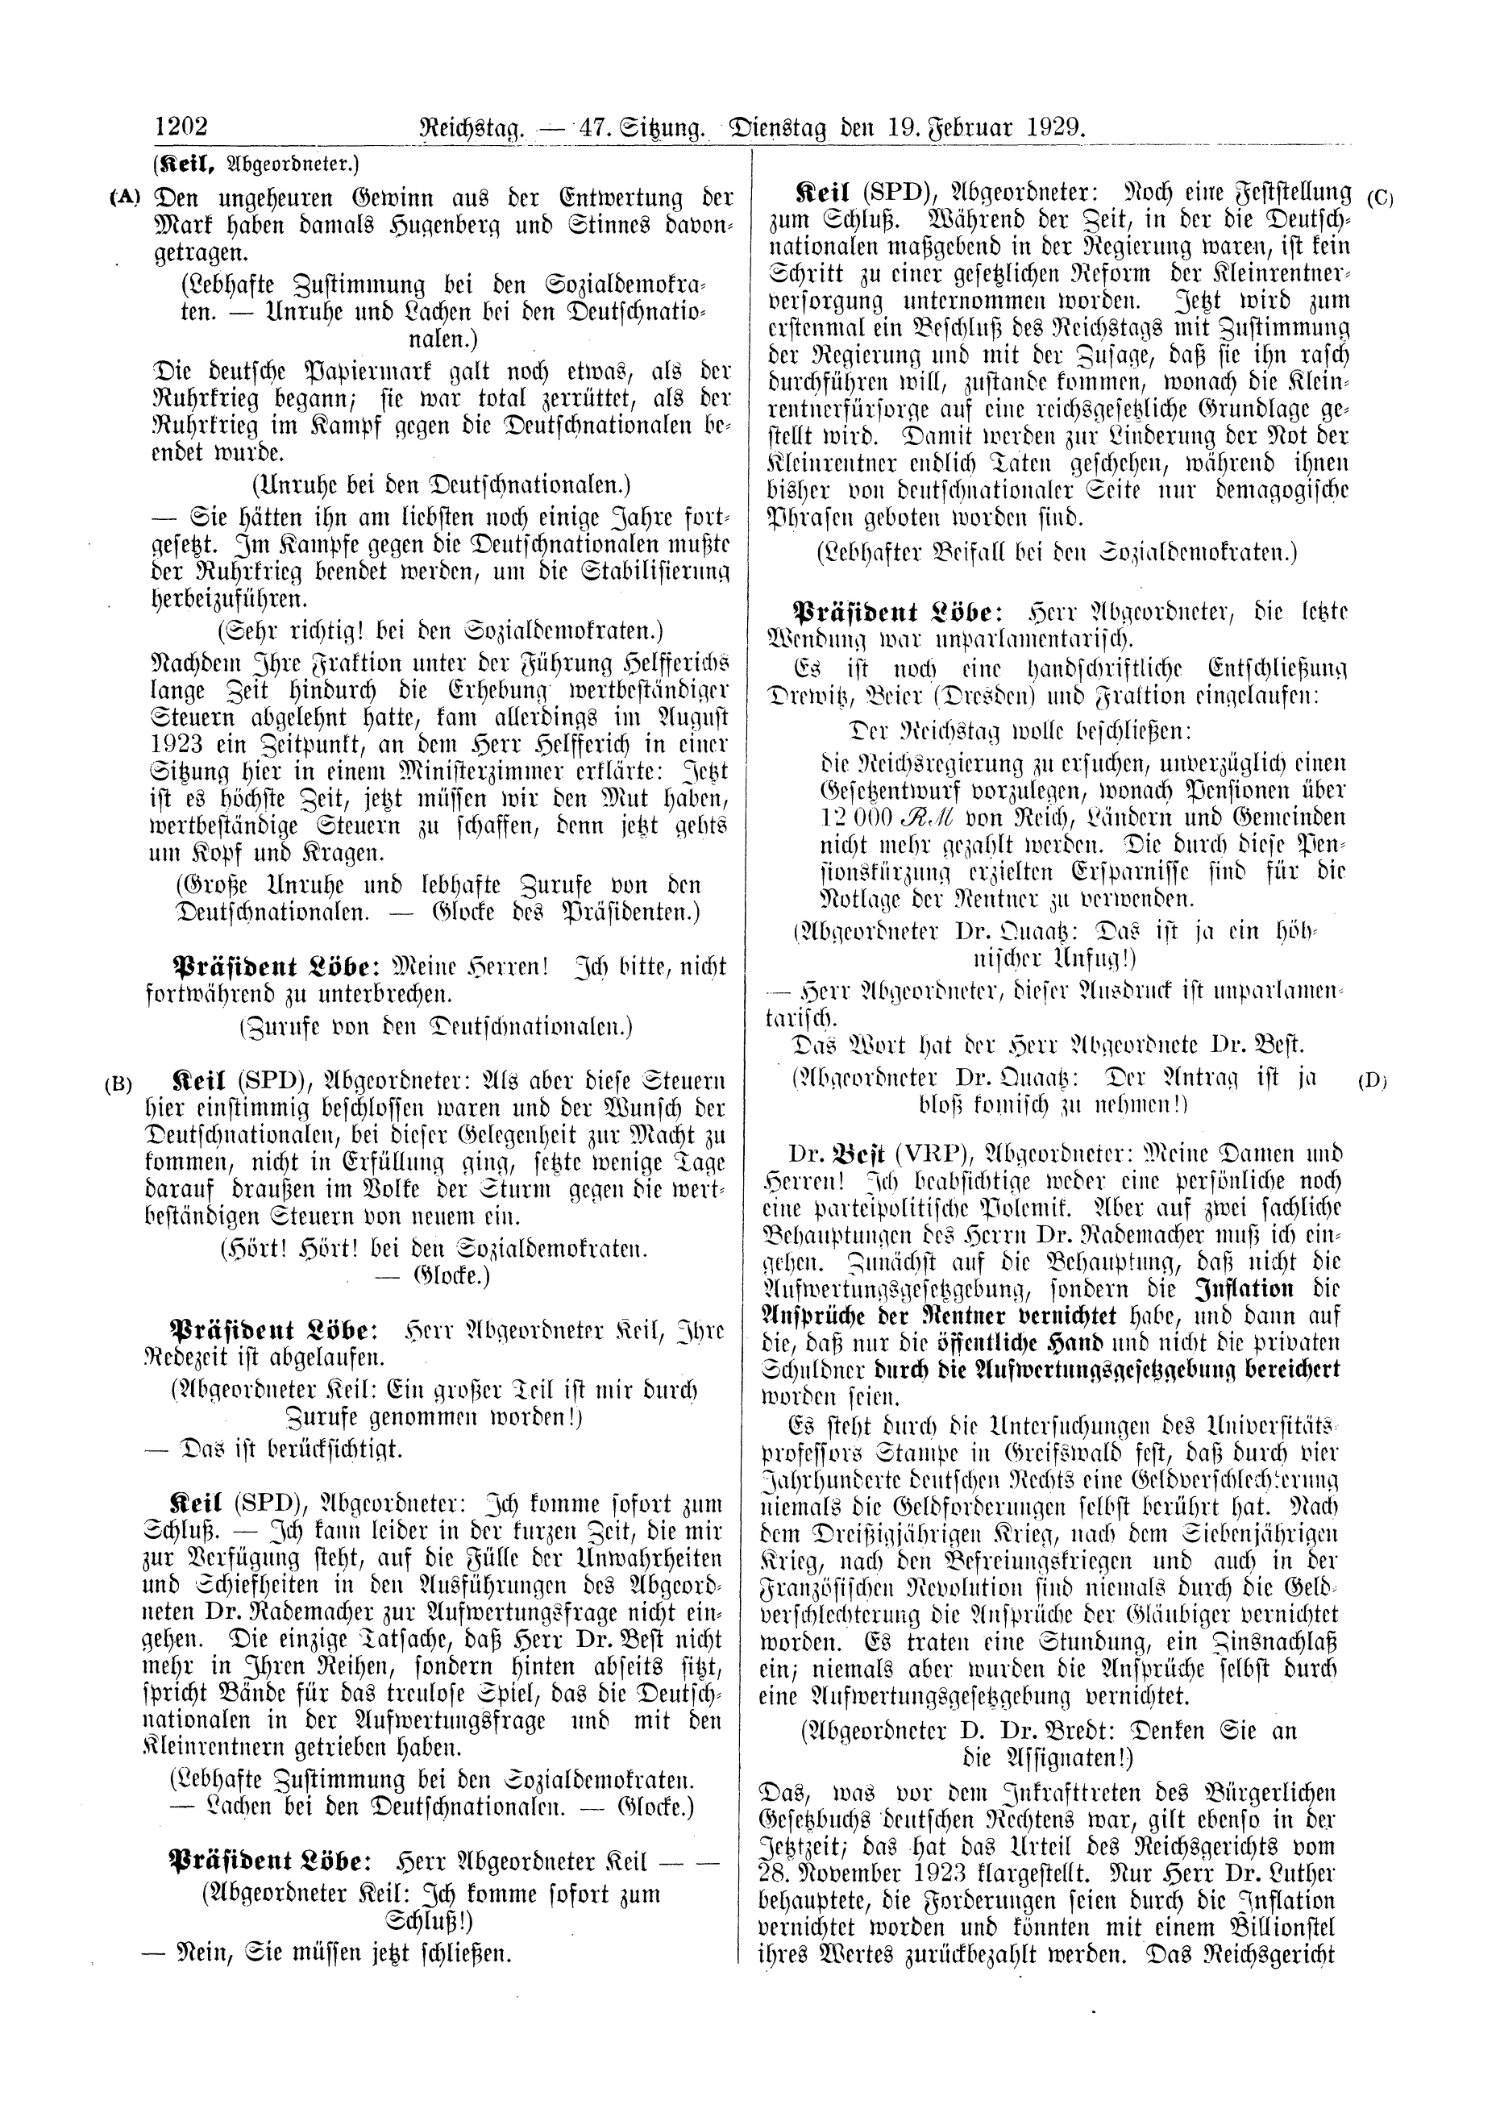 Scan of page 1202